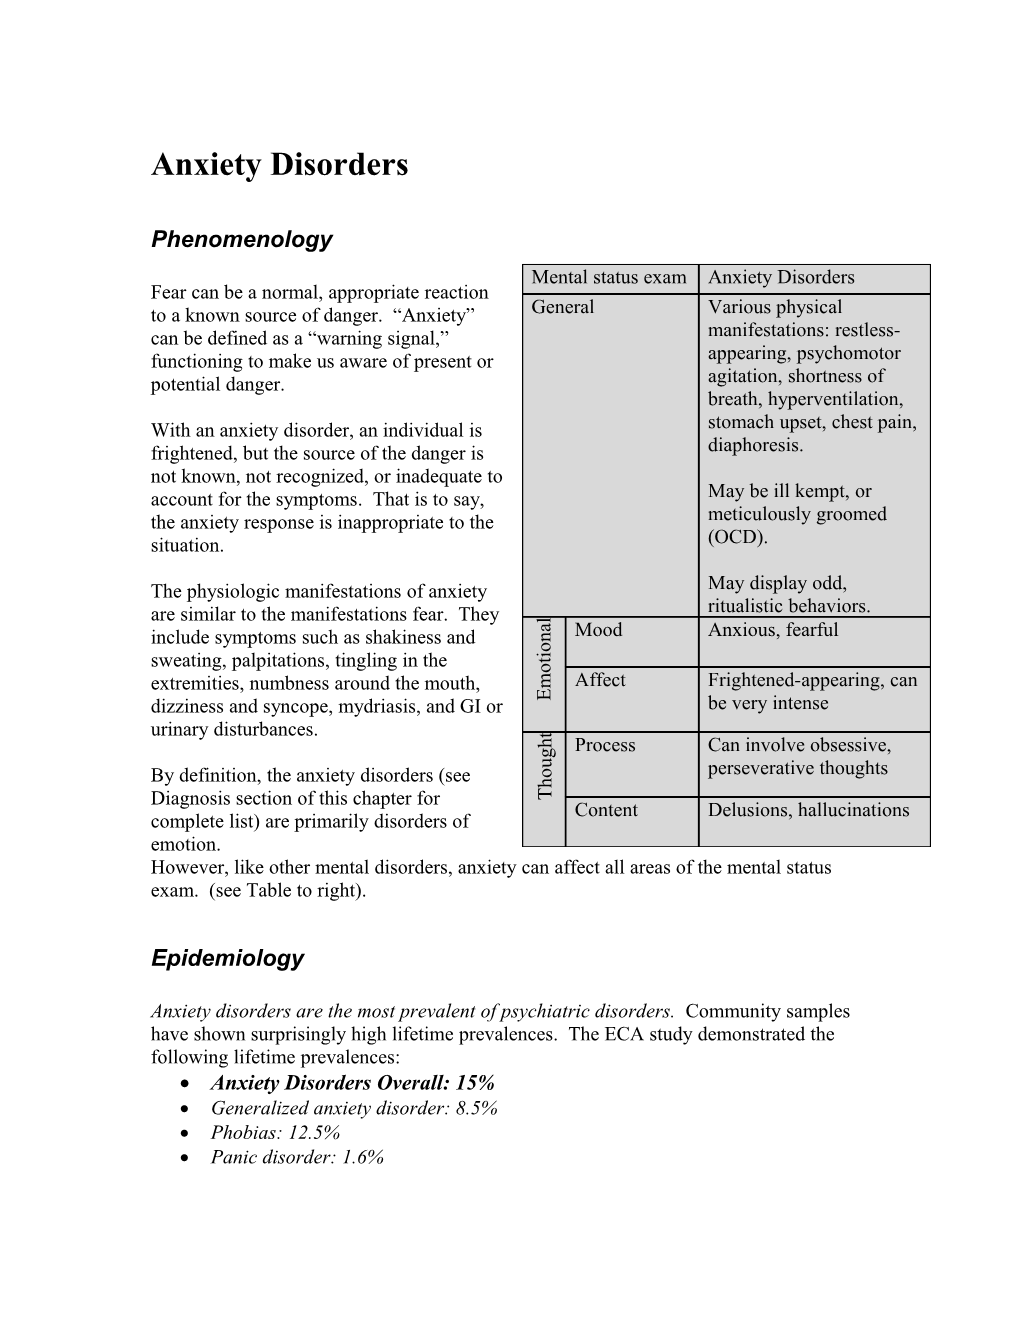 Anxiety Disorders Page 1 of 19